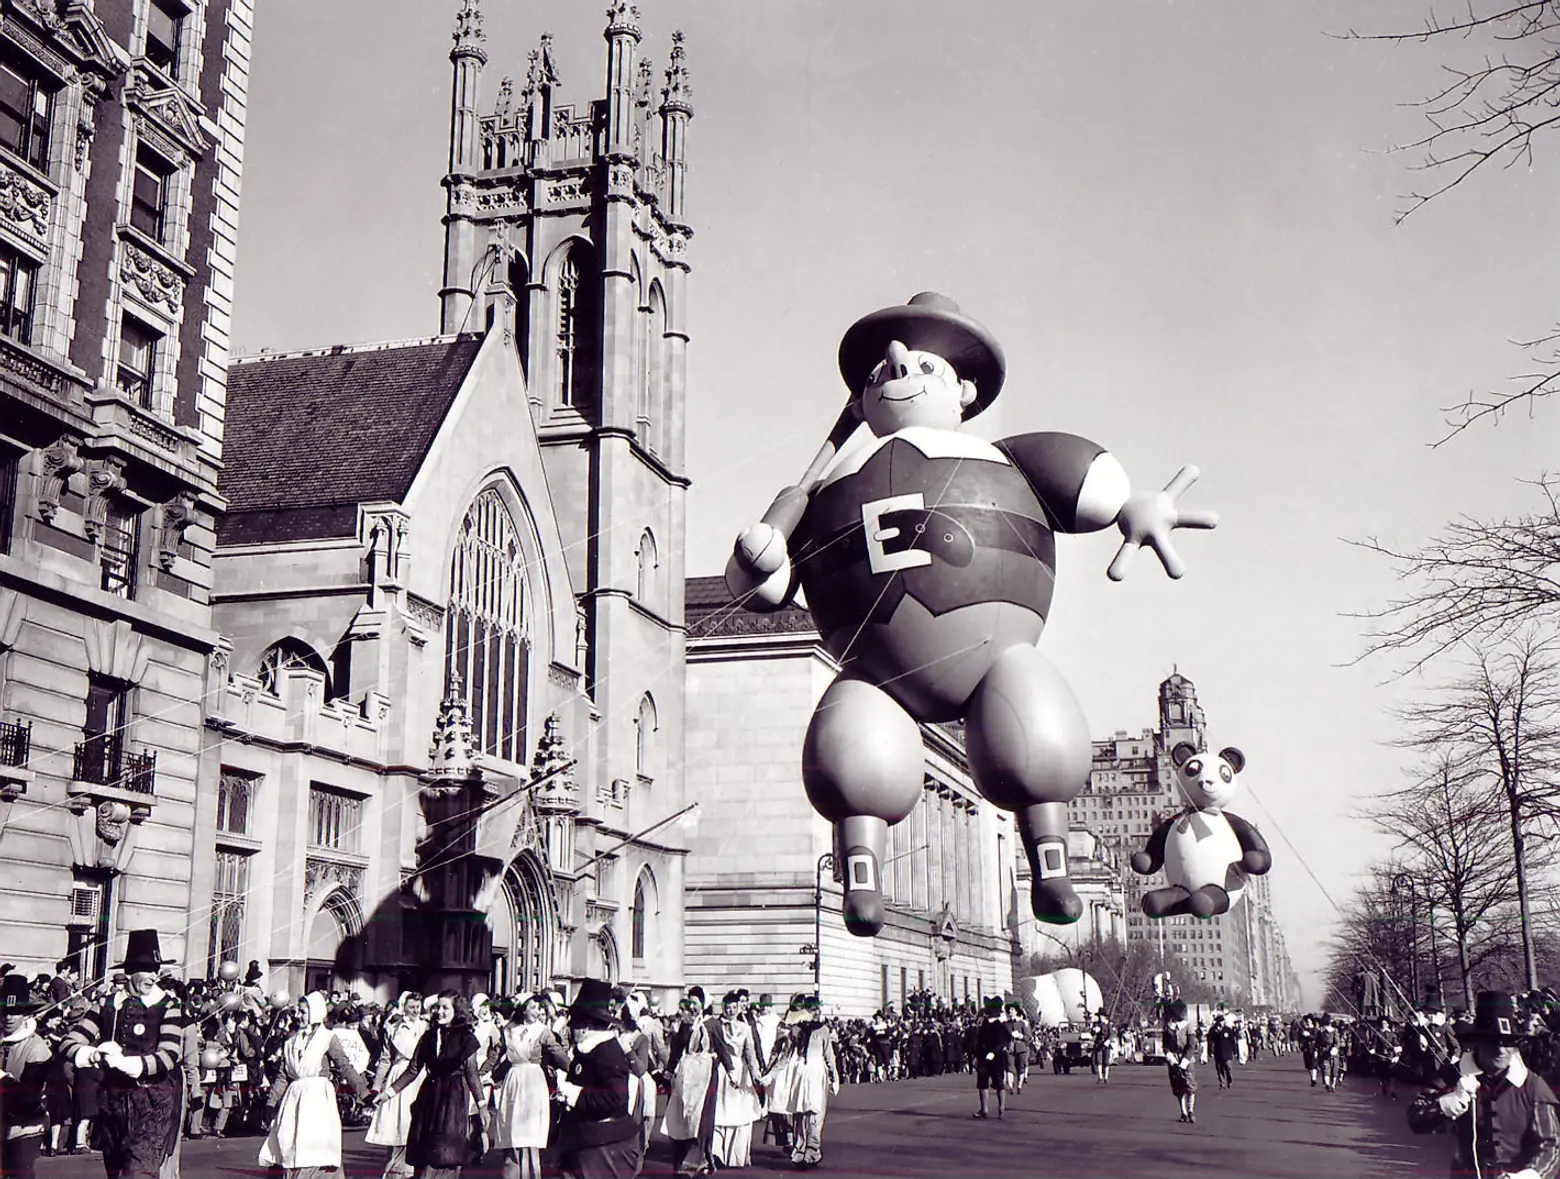 The 97-year history of the Macy’s Thanksgiving Day Parade